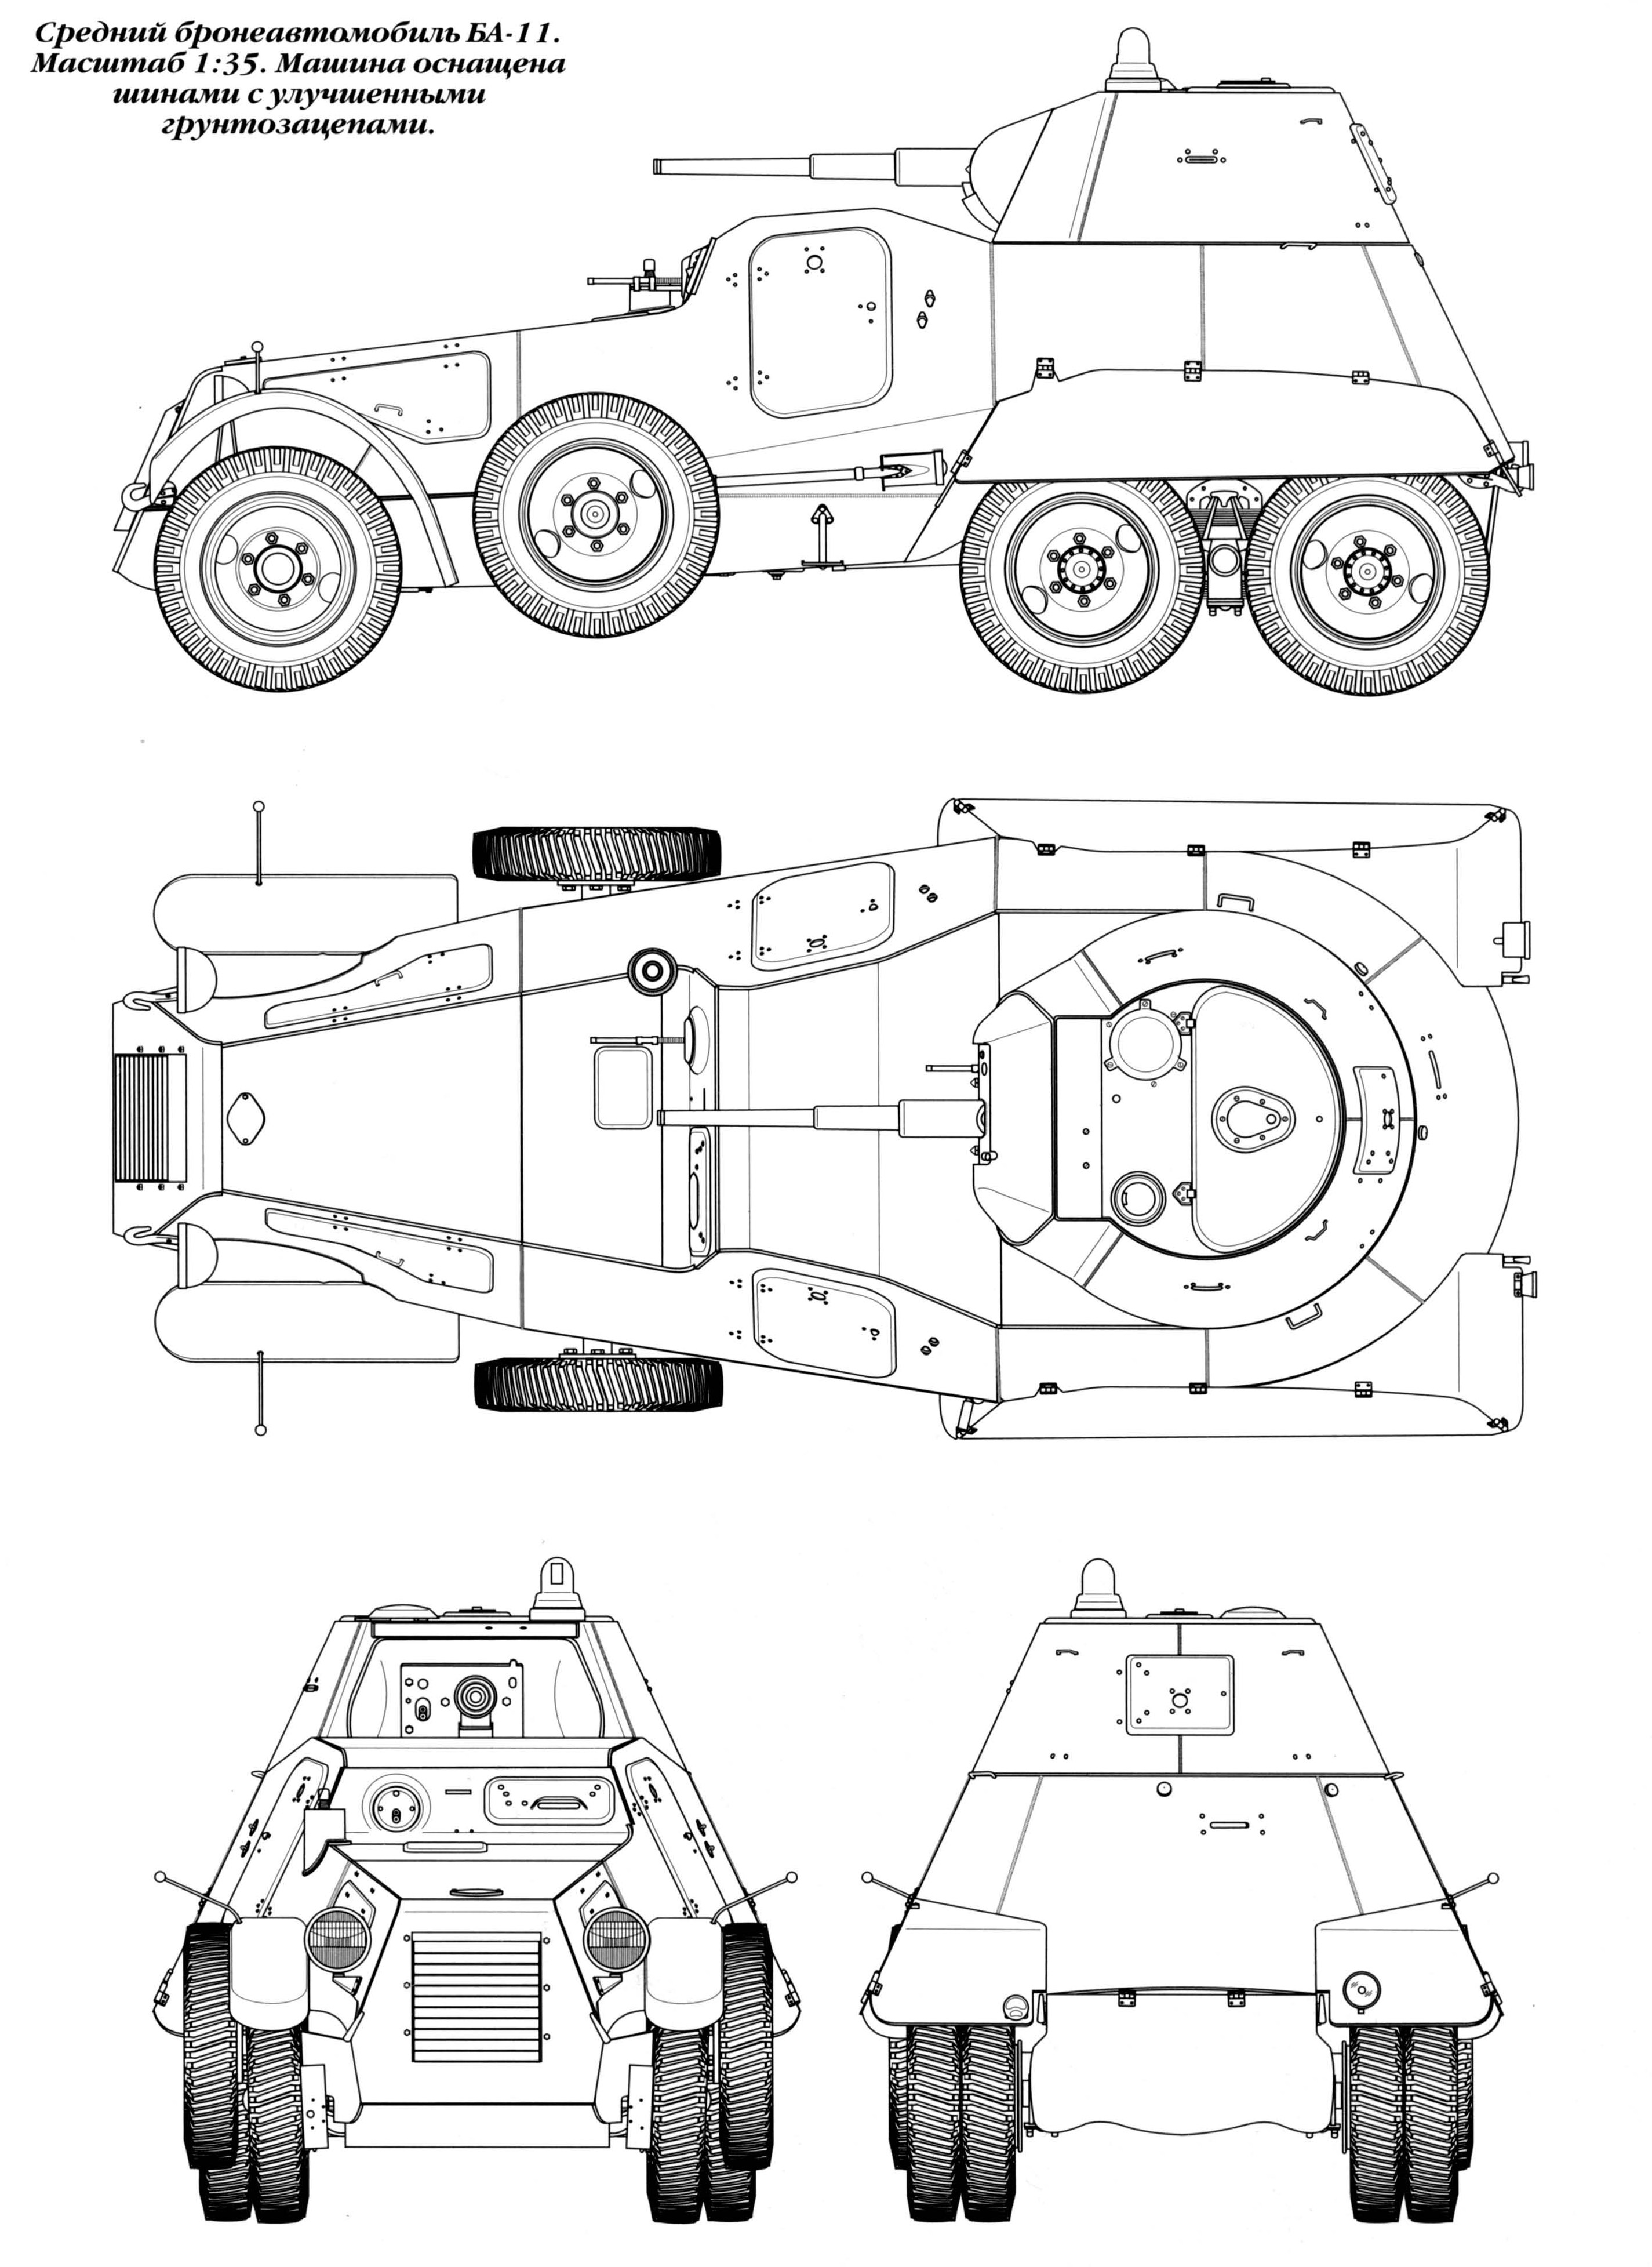 A technical drawing of the BA-11